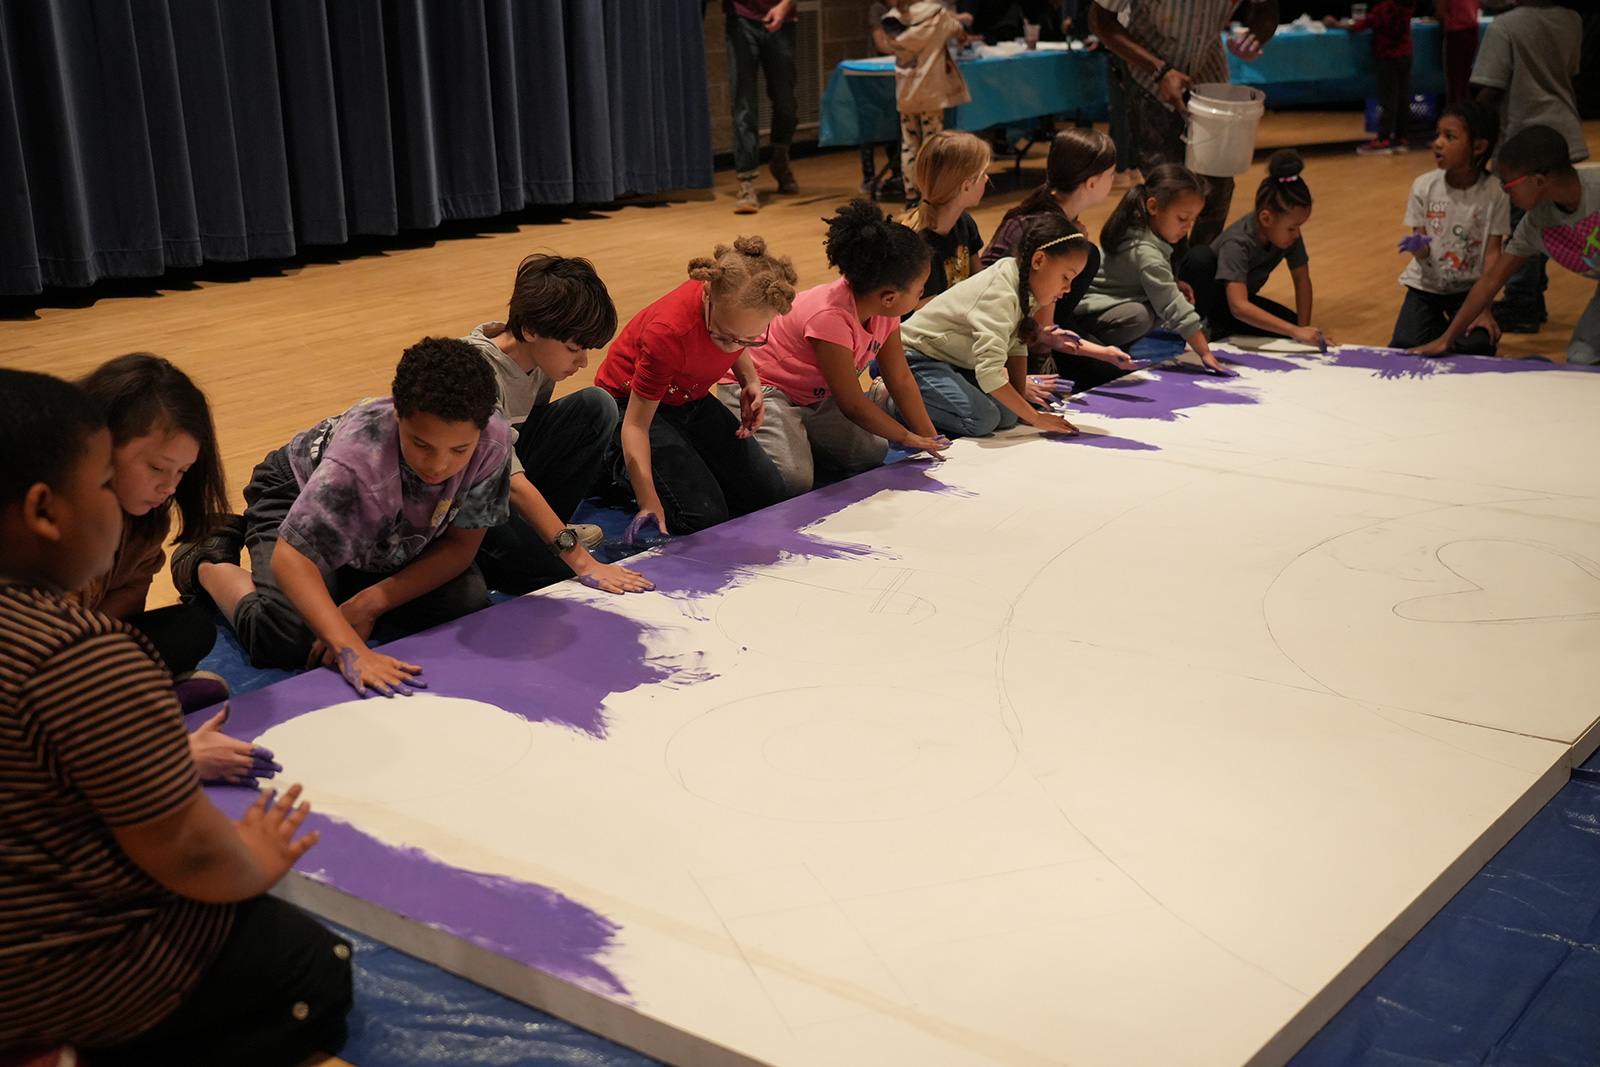 Children paint canvas for Nehemiah “Nemo” Edwards "Together We Thrive" piece.